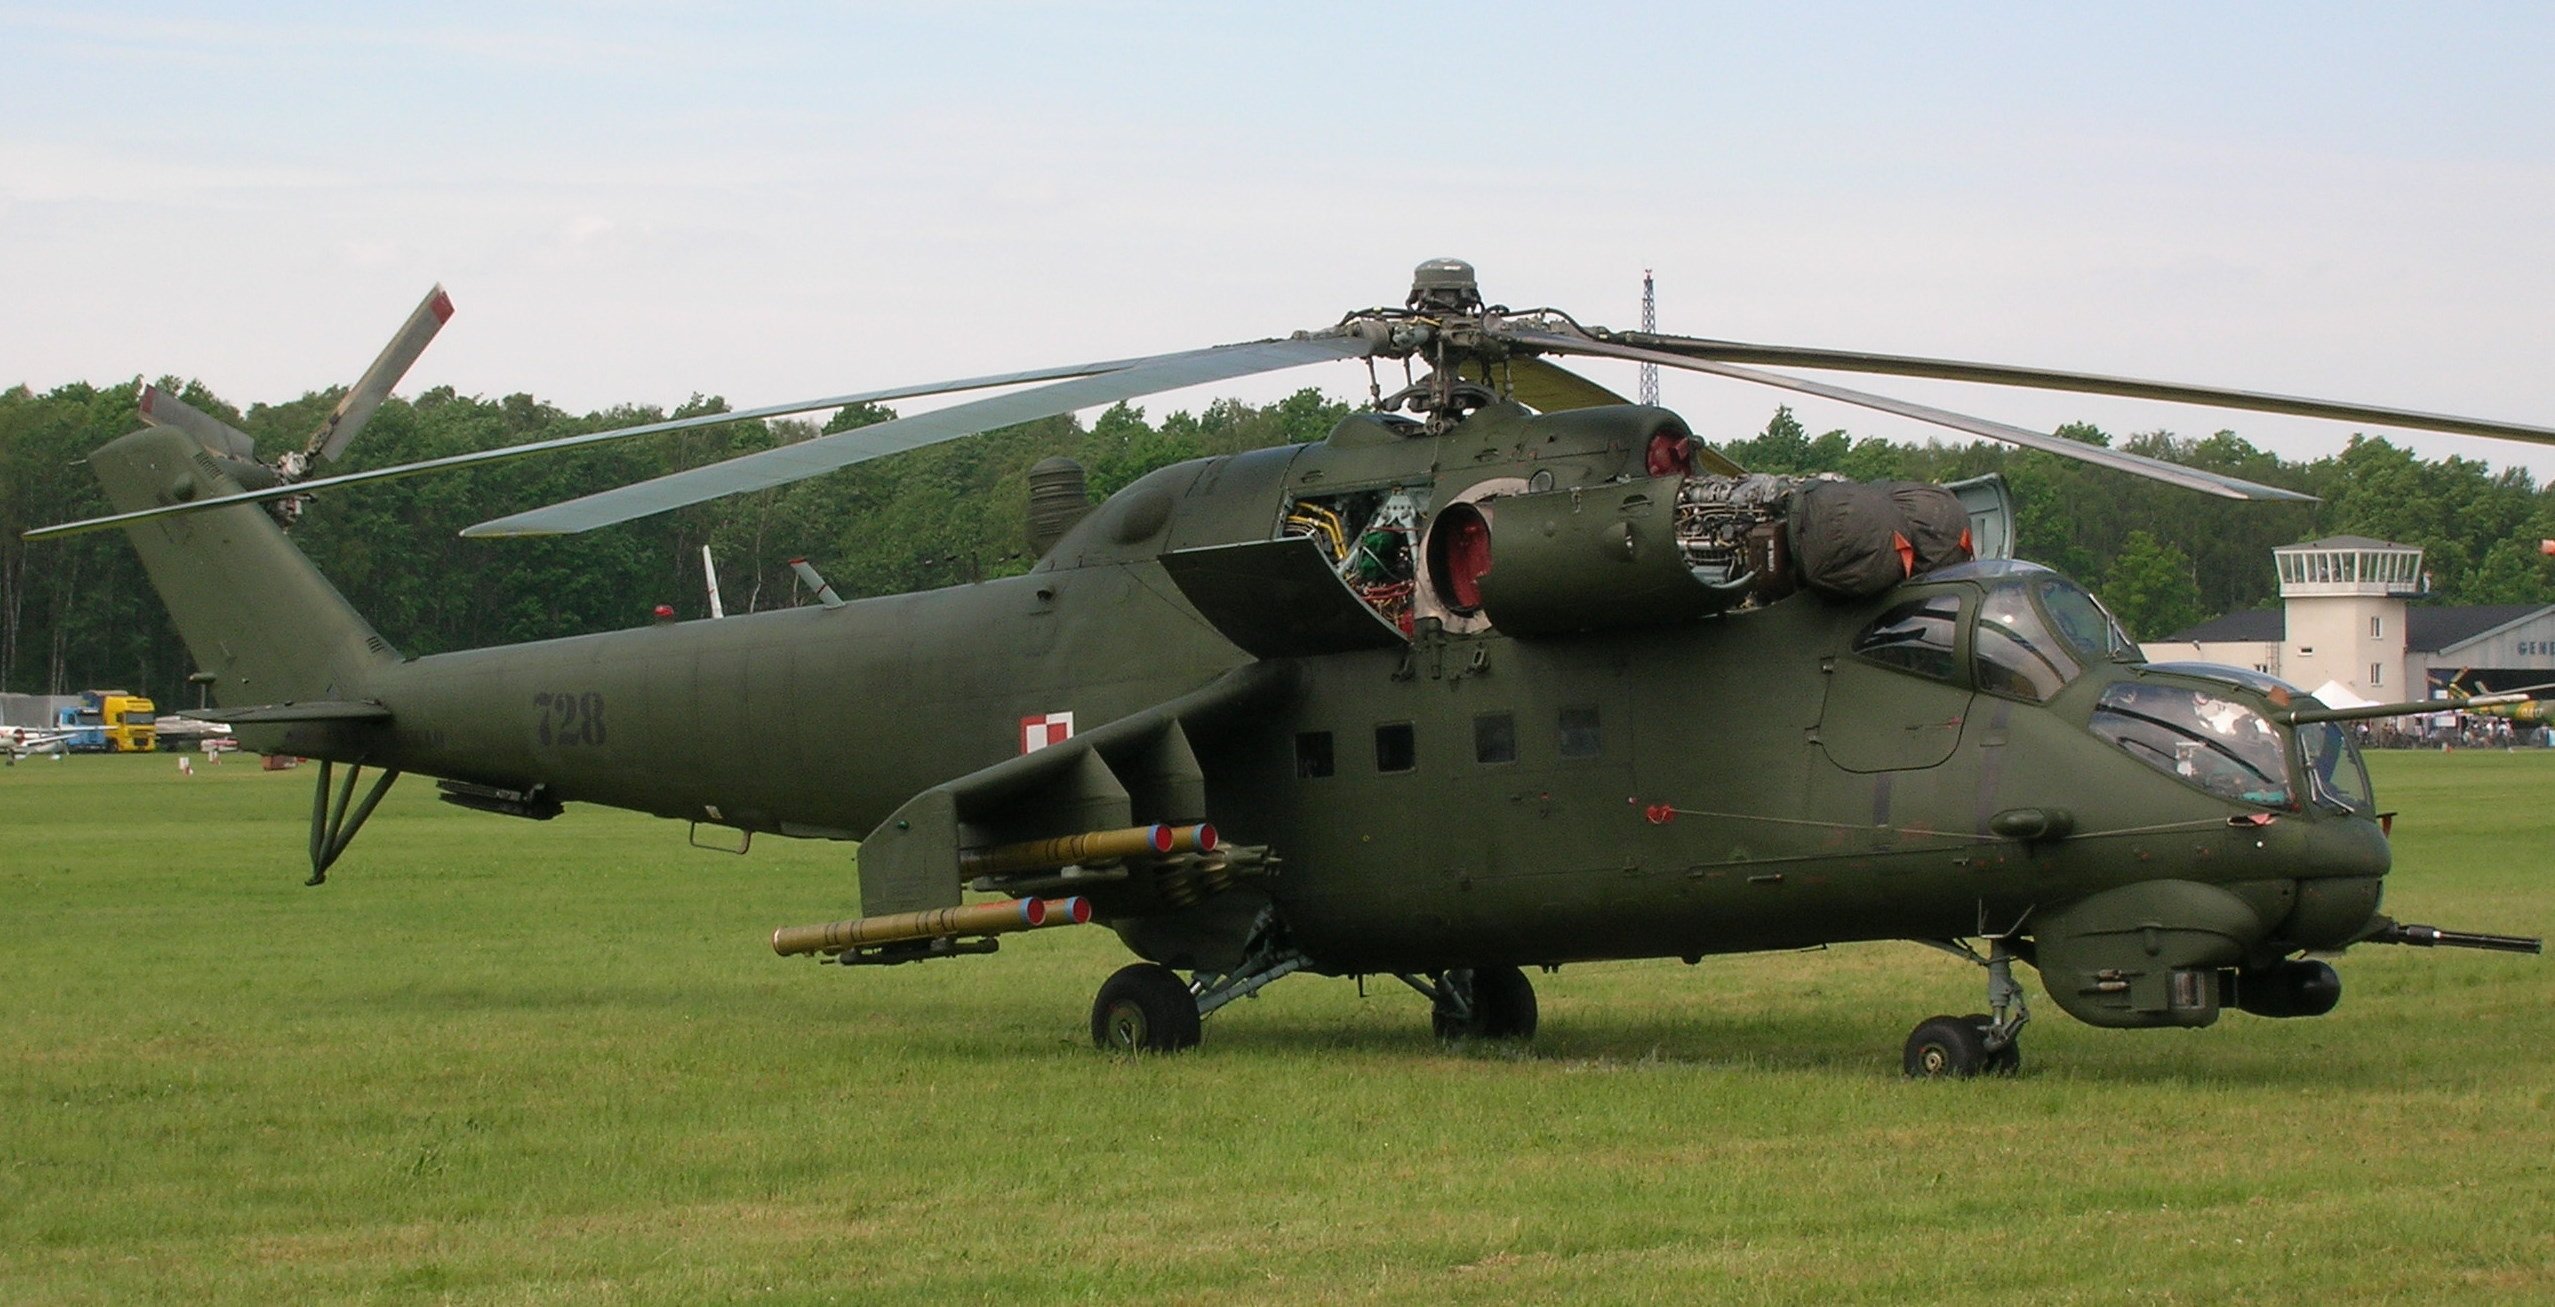 mi 24, Hind, Gunship, Russian, Russia, Military, Weapon, Helicopter, Aircraft,  24 Wallpaper